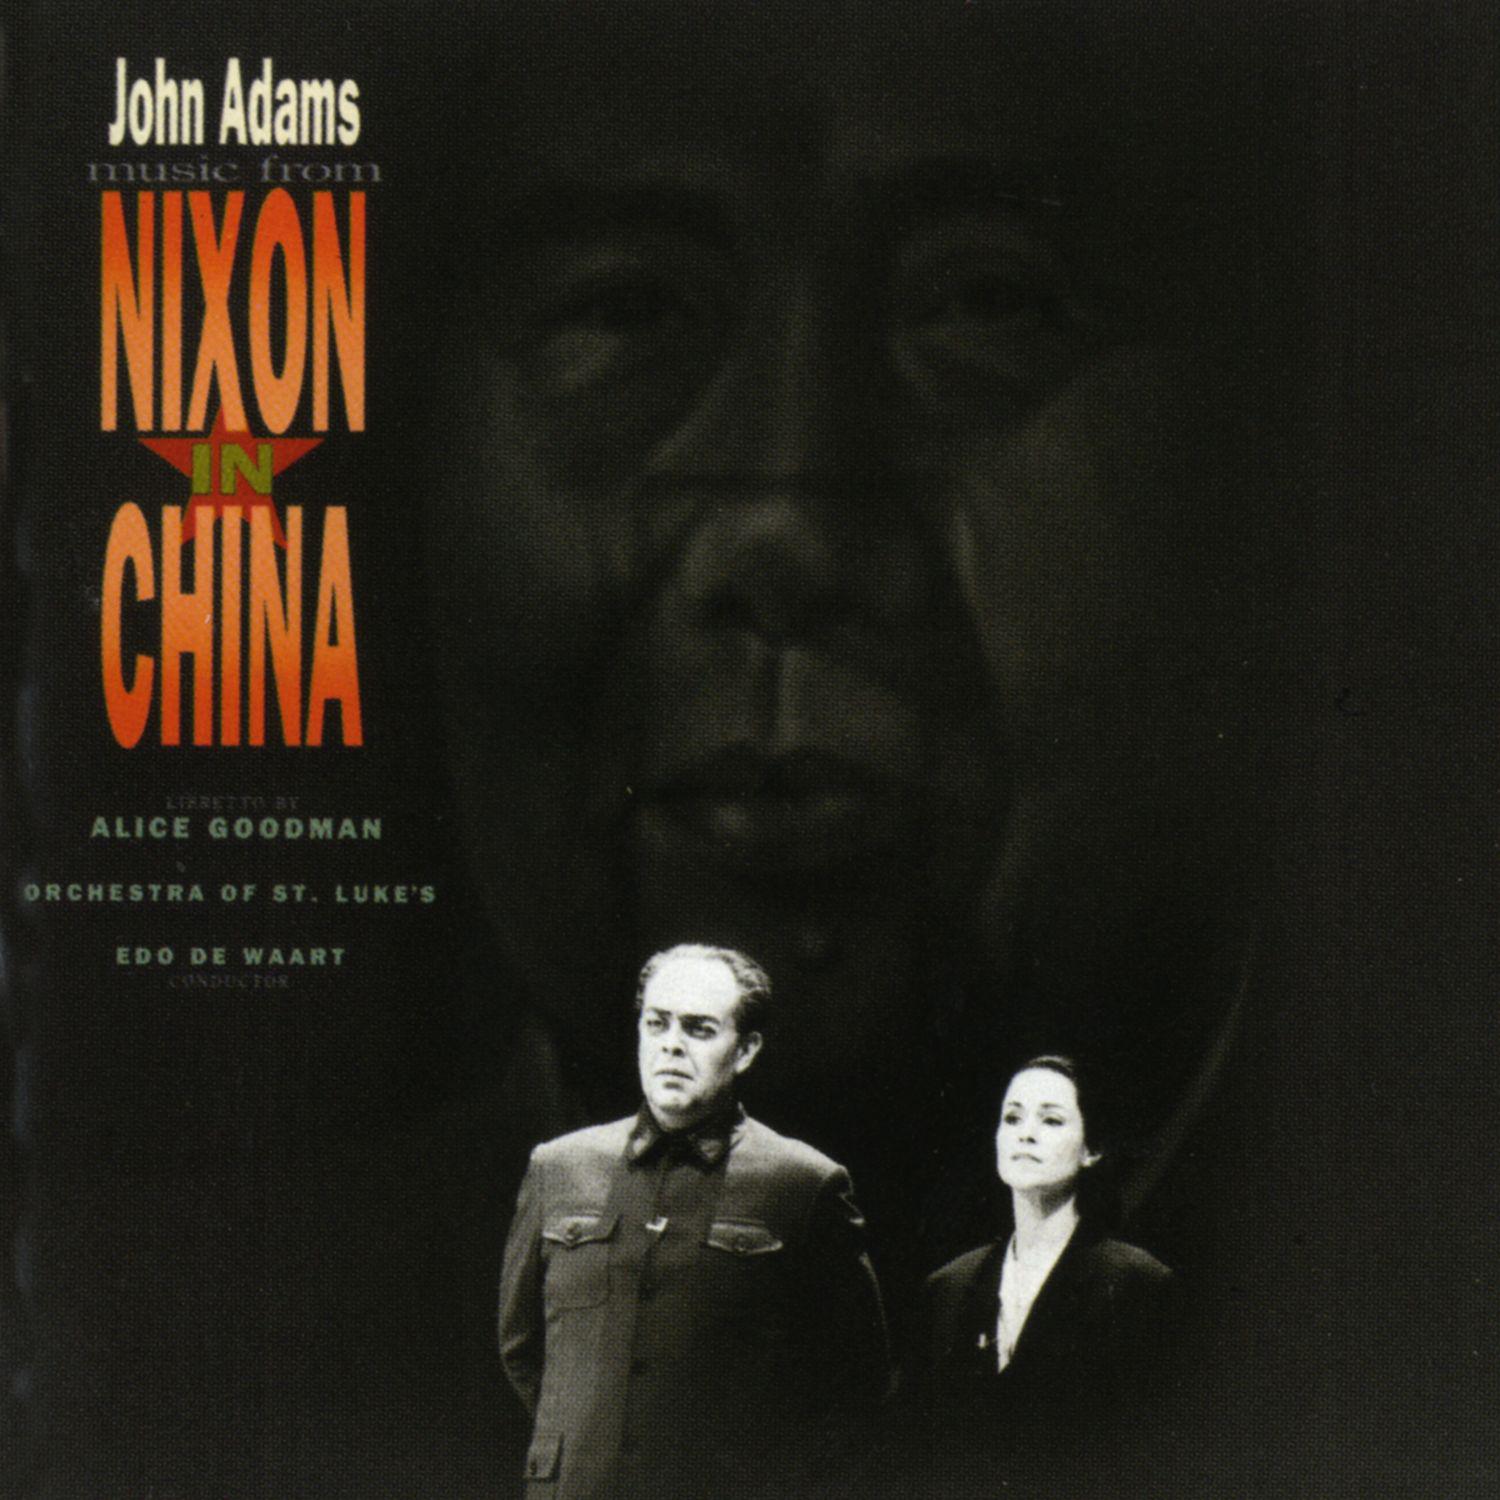 Nixon in China, Act II, Scene 2:"Oh What a Day I Thought I'd Die!"